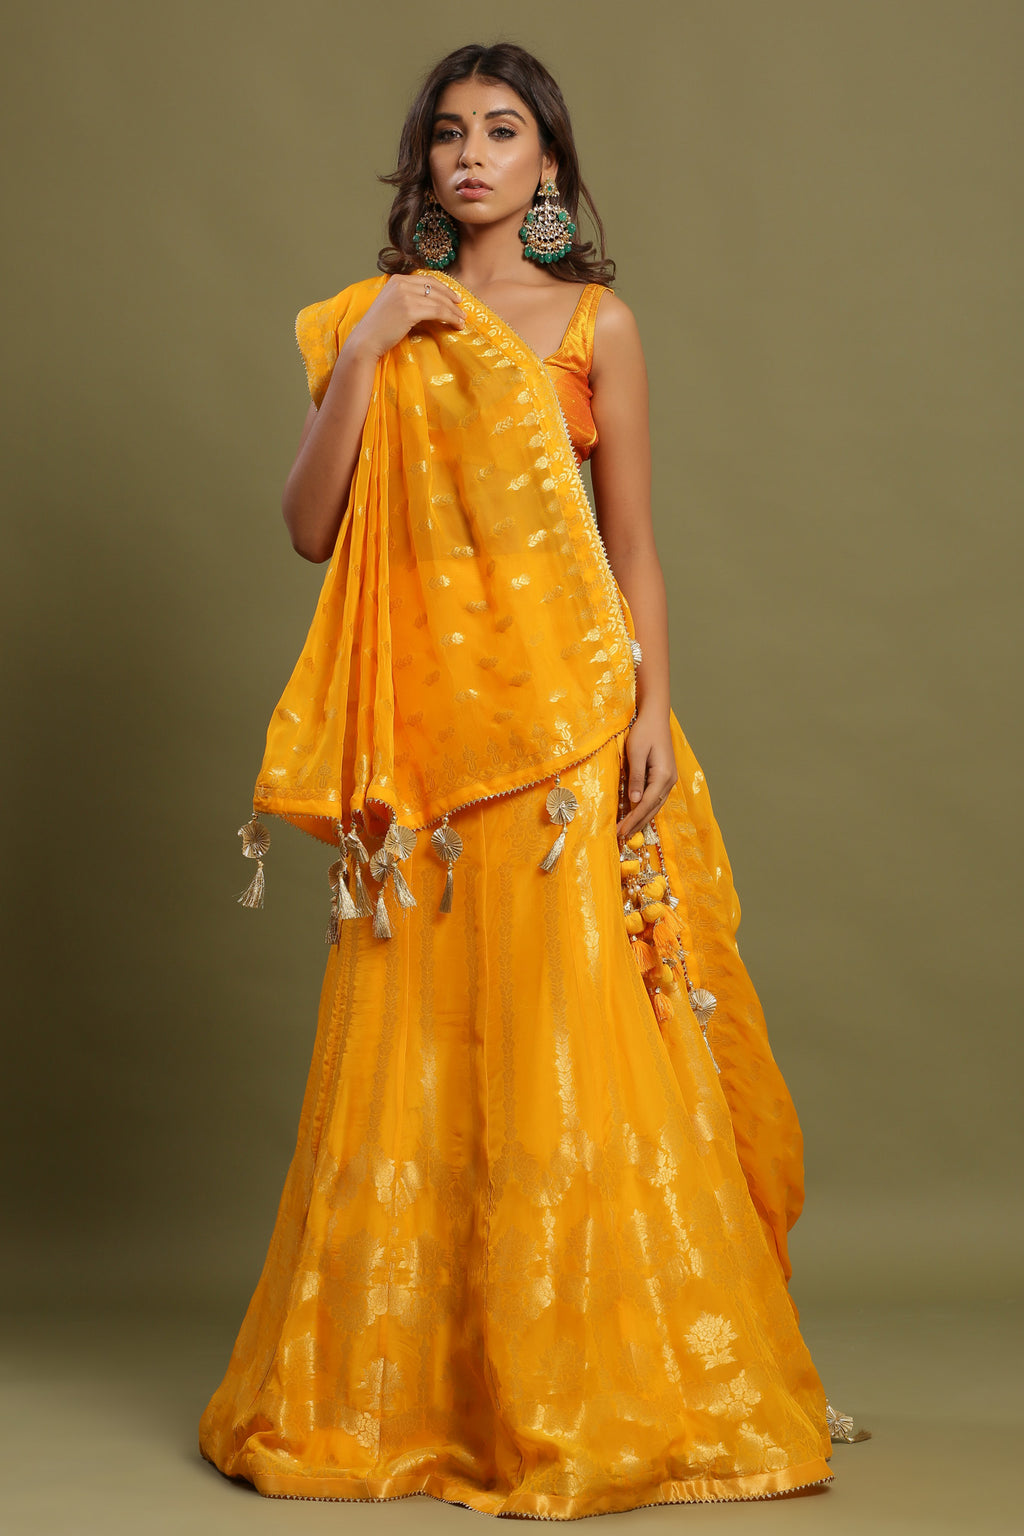 Shop yellow zari embroidered lehenga with attached dupatta. It is crafted in silk with intrinsic zari embroidery on the lehenga and solid blouse tassels on a dupatta, with beautiful heavy tassels attached to the lehenga. Shop online from Pure Elegance.